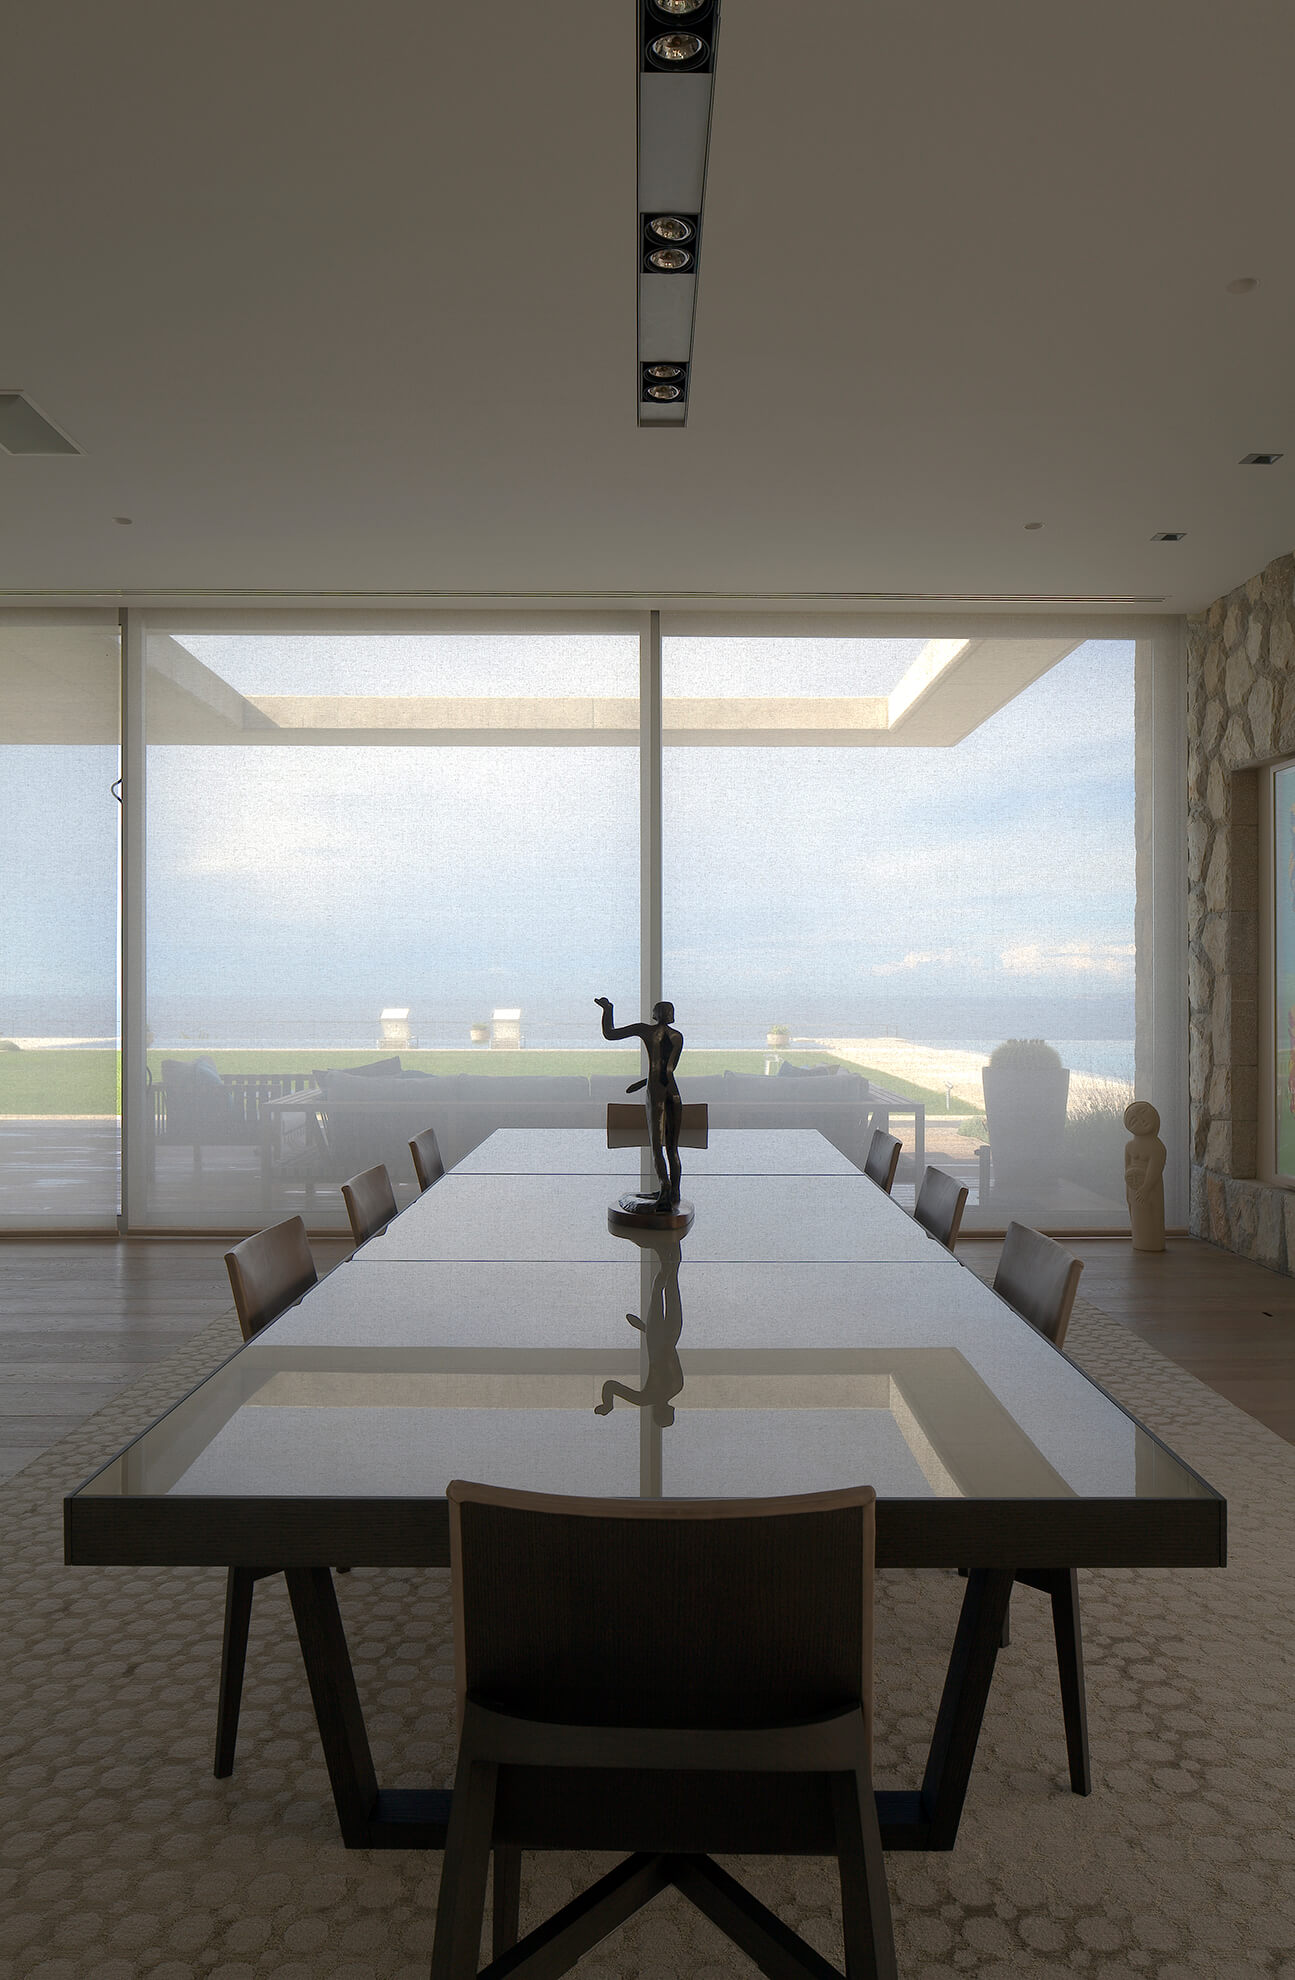 Detail view of the large dining room table, in front of the sliding glass doors that lead to the garden